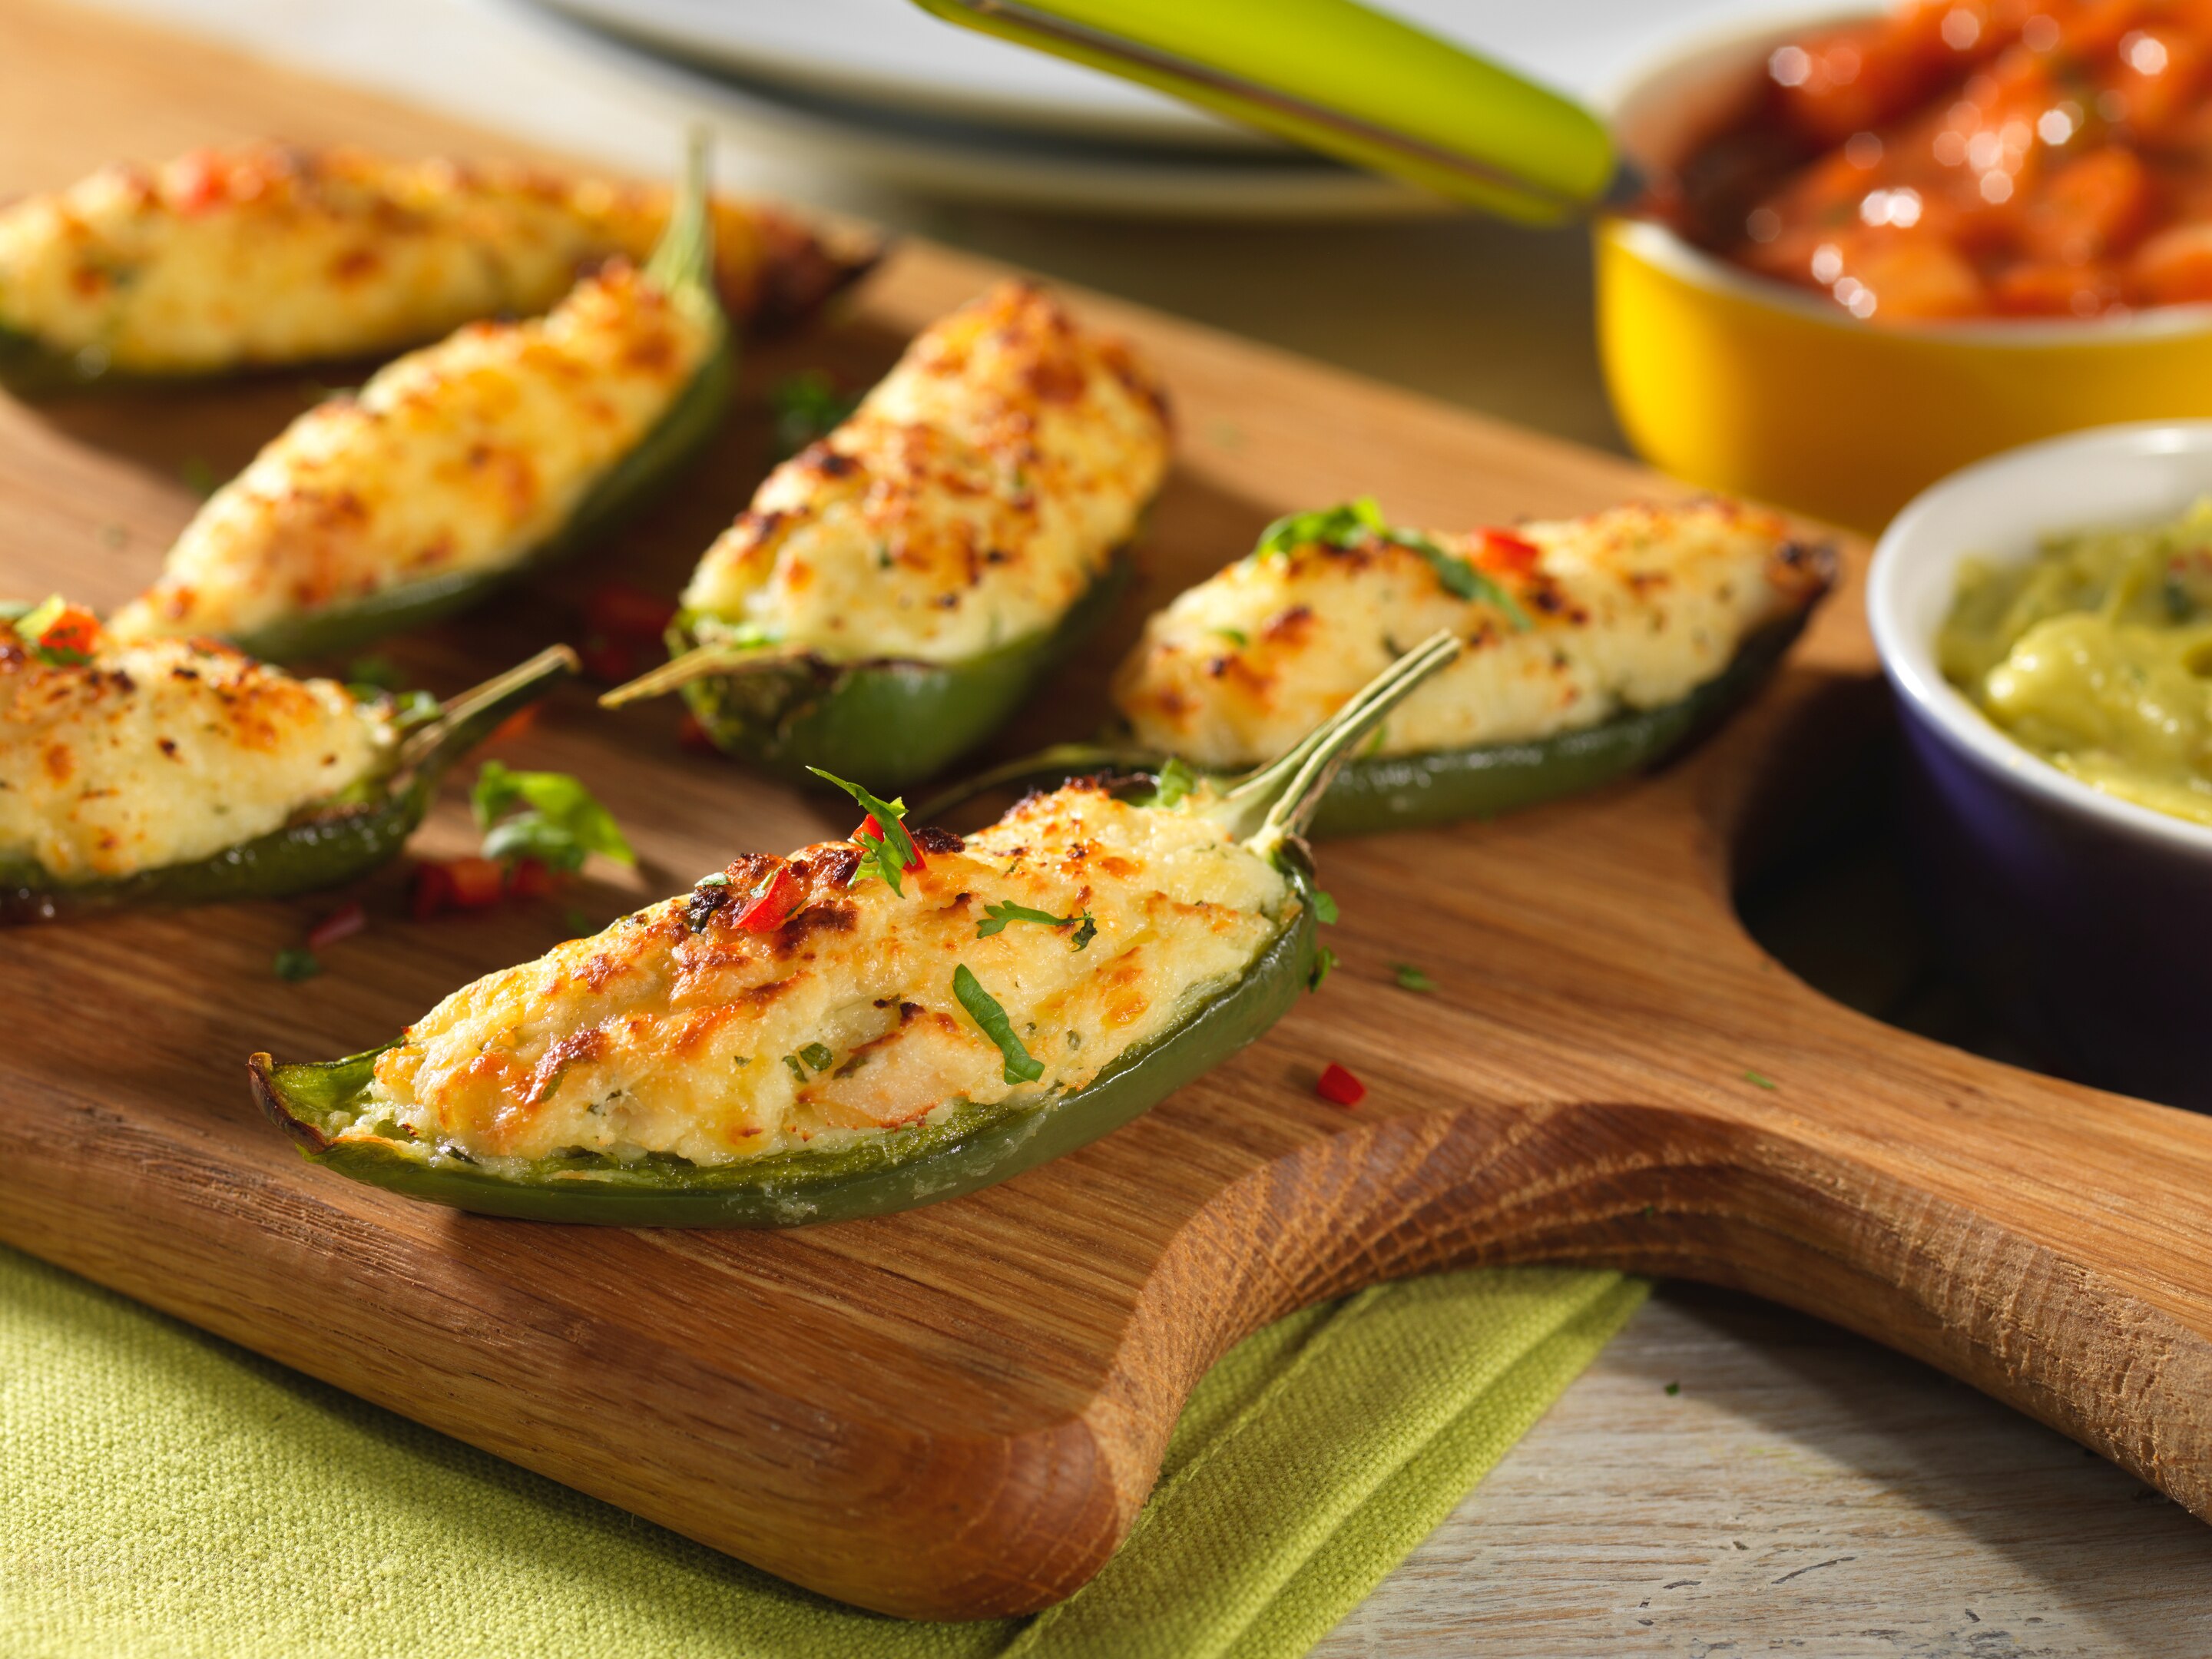 Baked jalapeno poppers with spicy beef and grated cheese